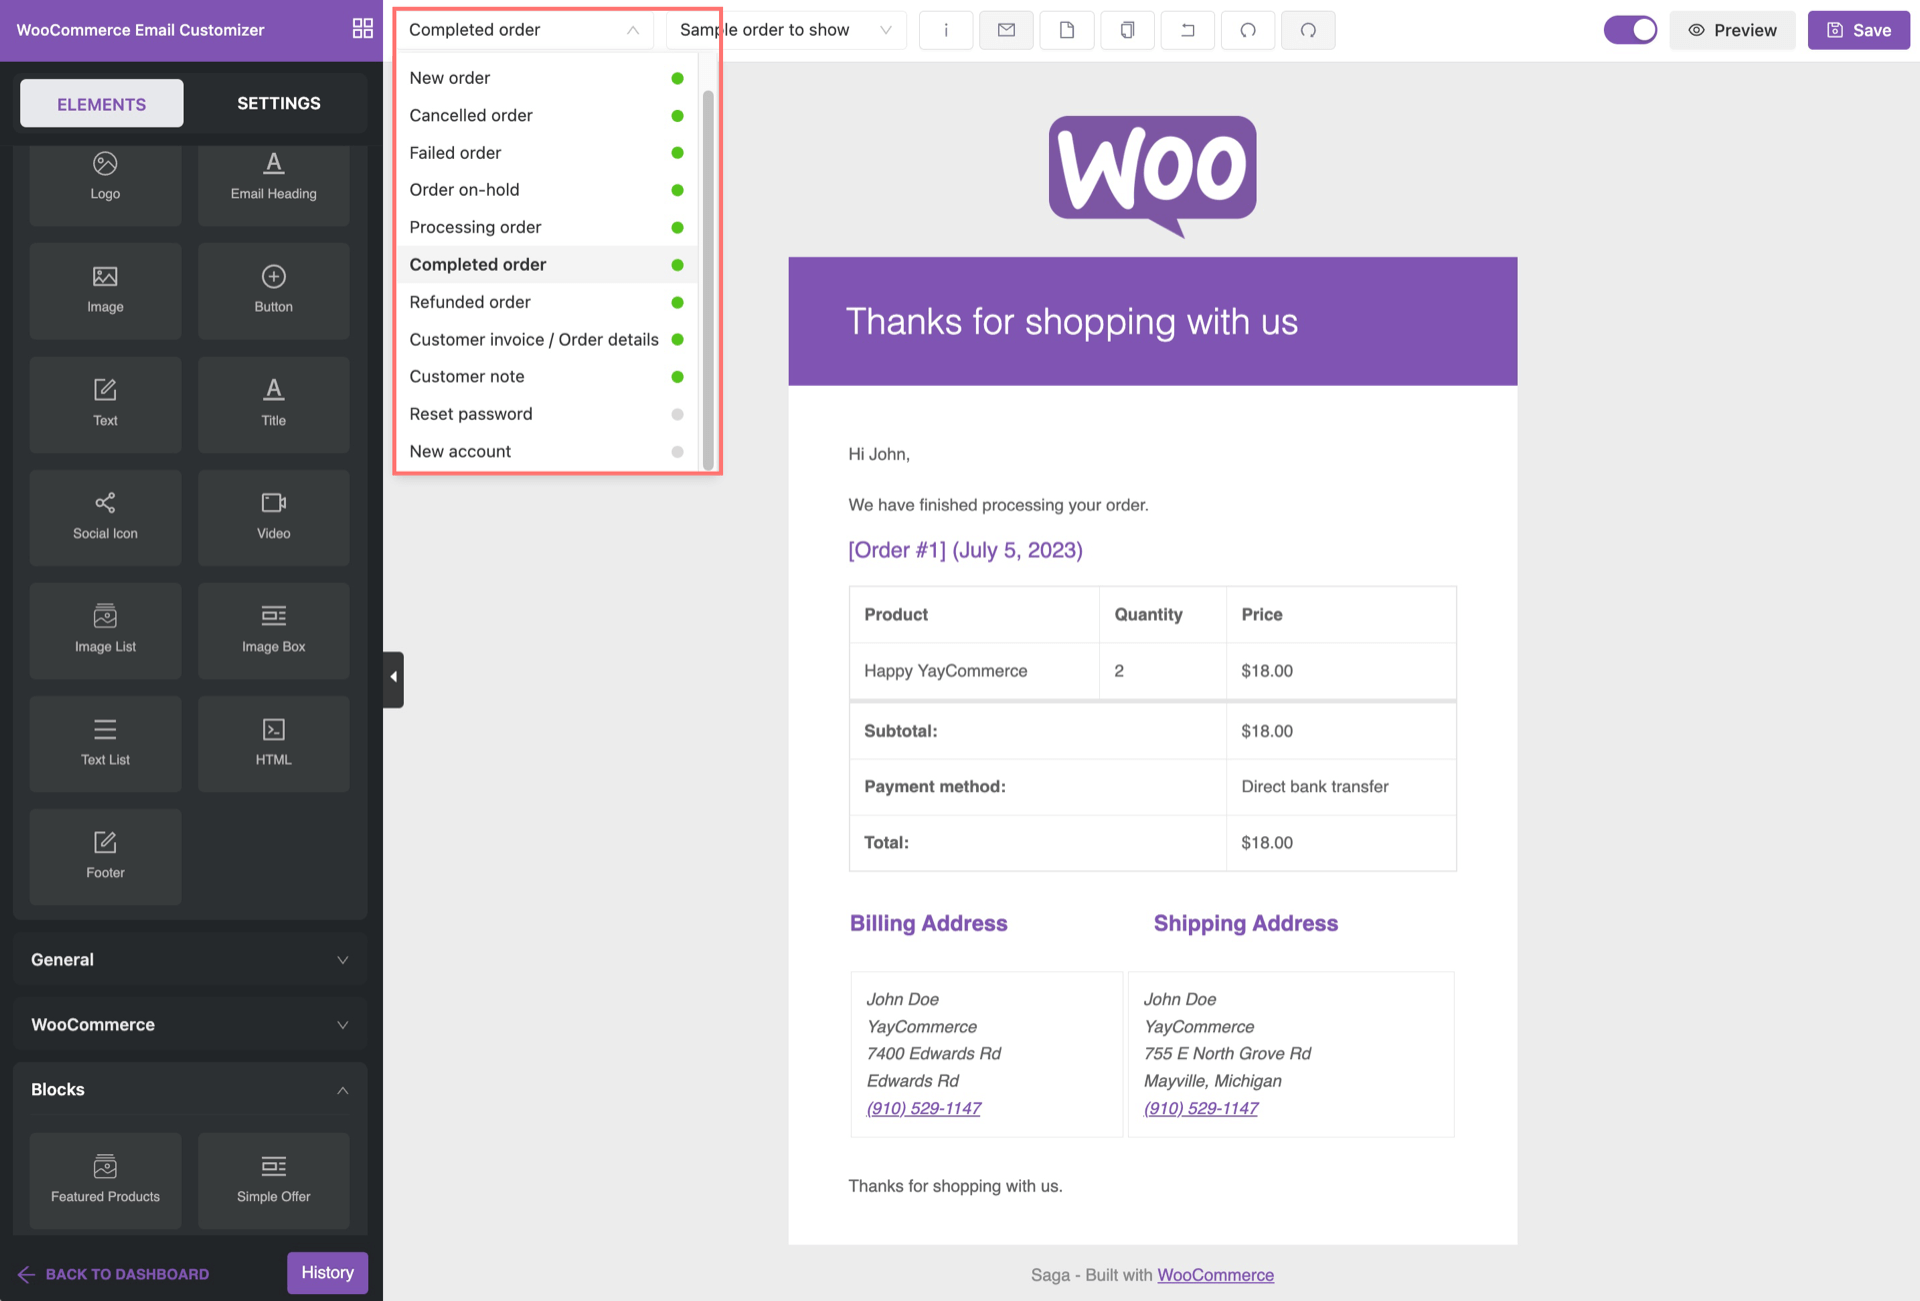 WooCommerce core emails in the dropdown list